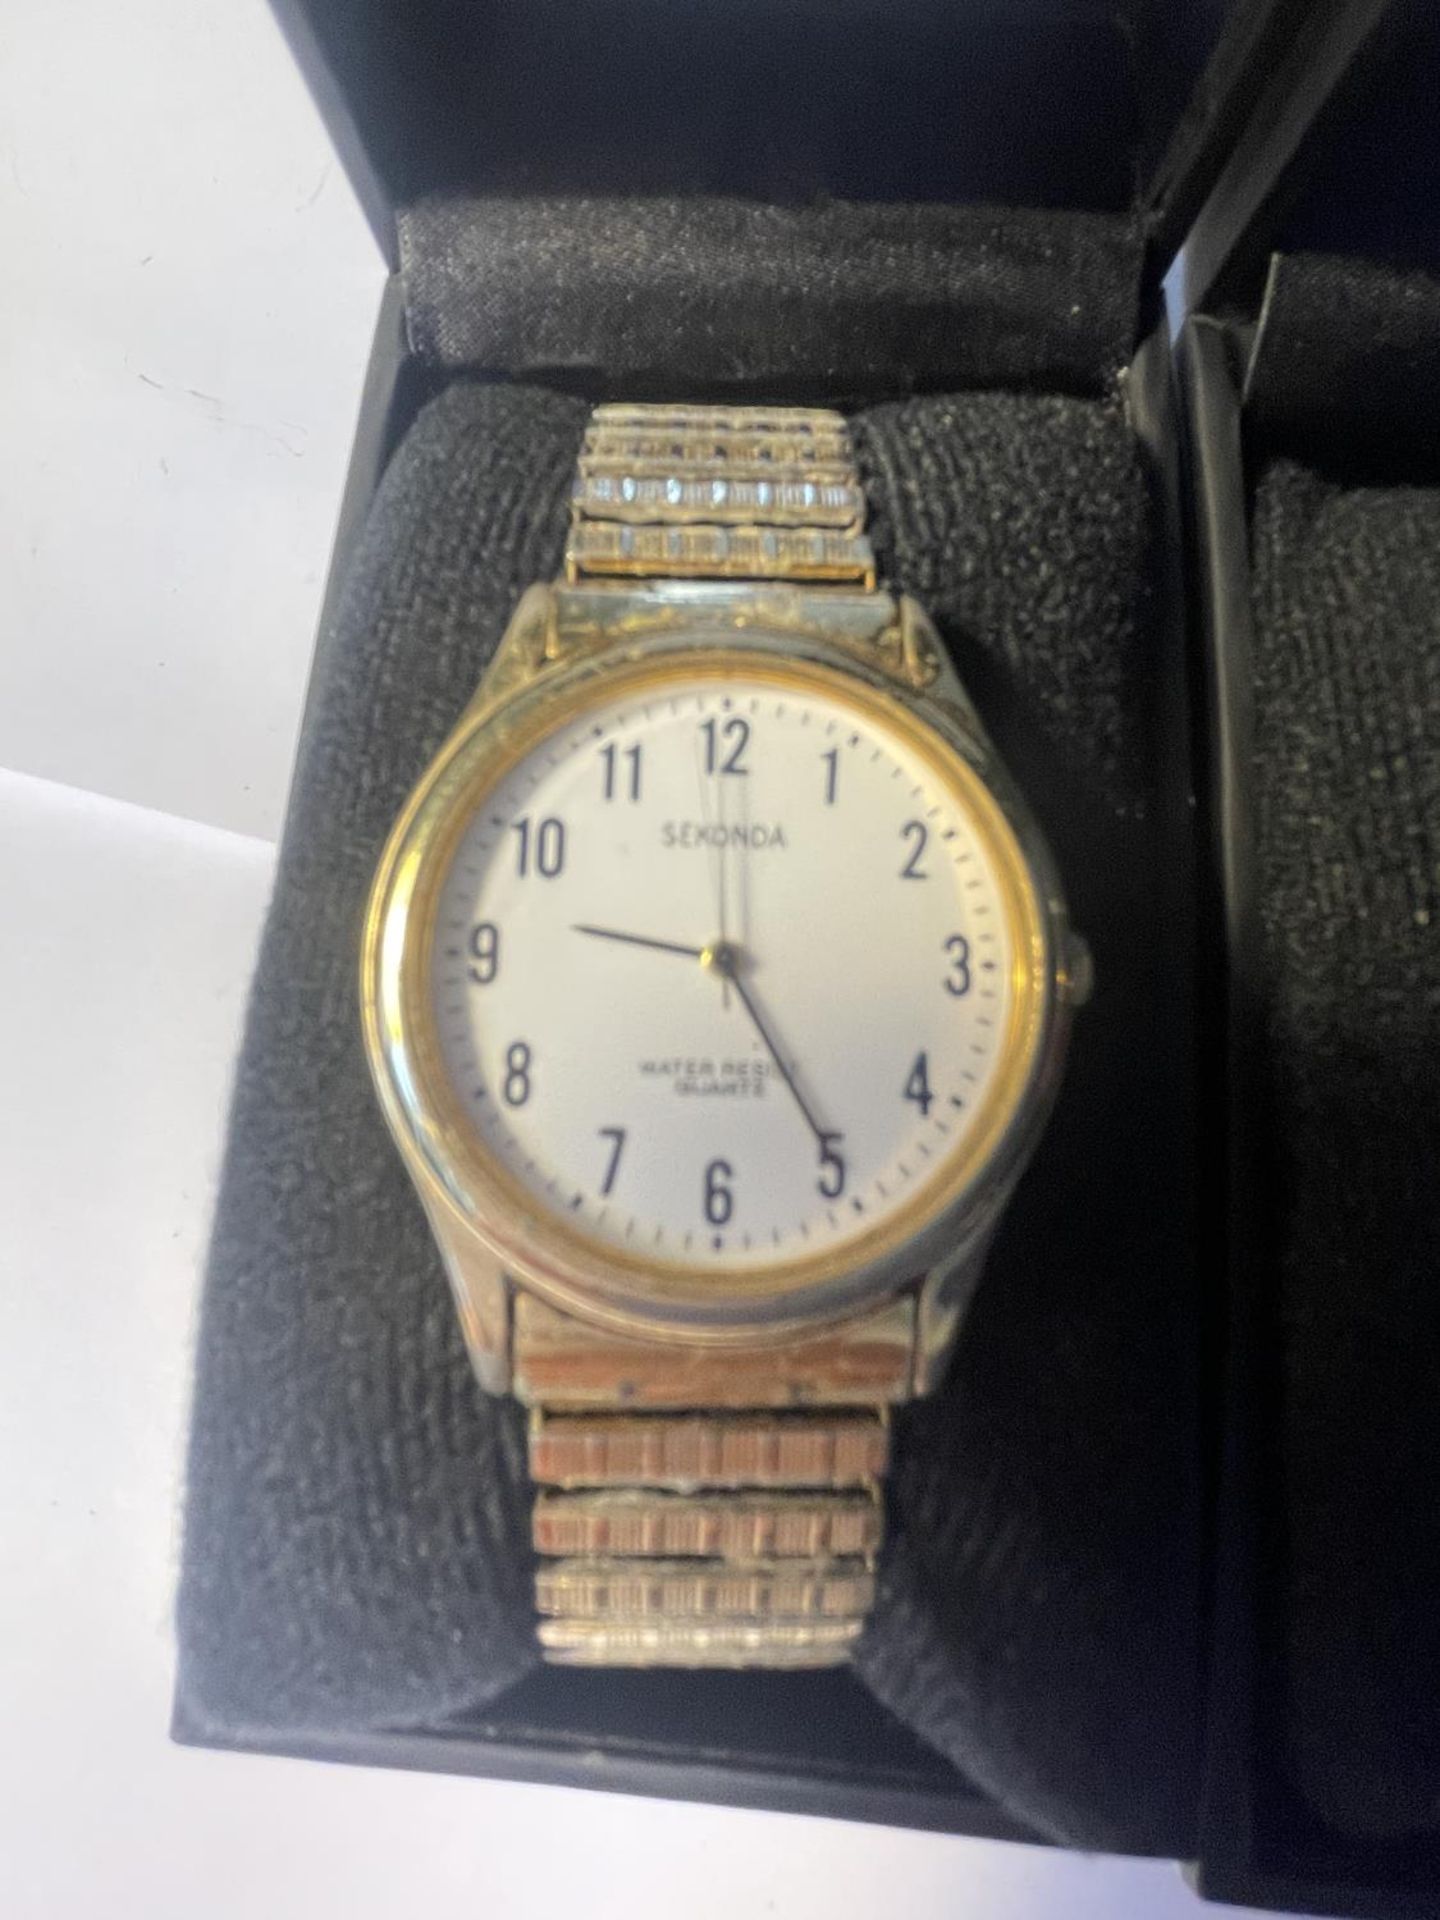 TWO SEKONDA WRIST WATCHES IN PRESENTATION BOXES SEEN WORKING BUT NO WARRANTY - Image 2 of 4